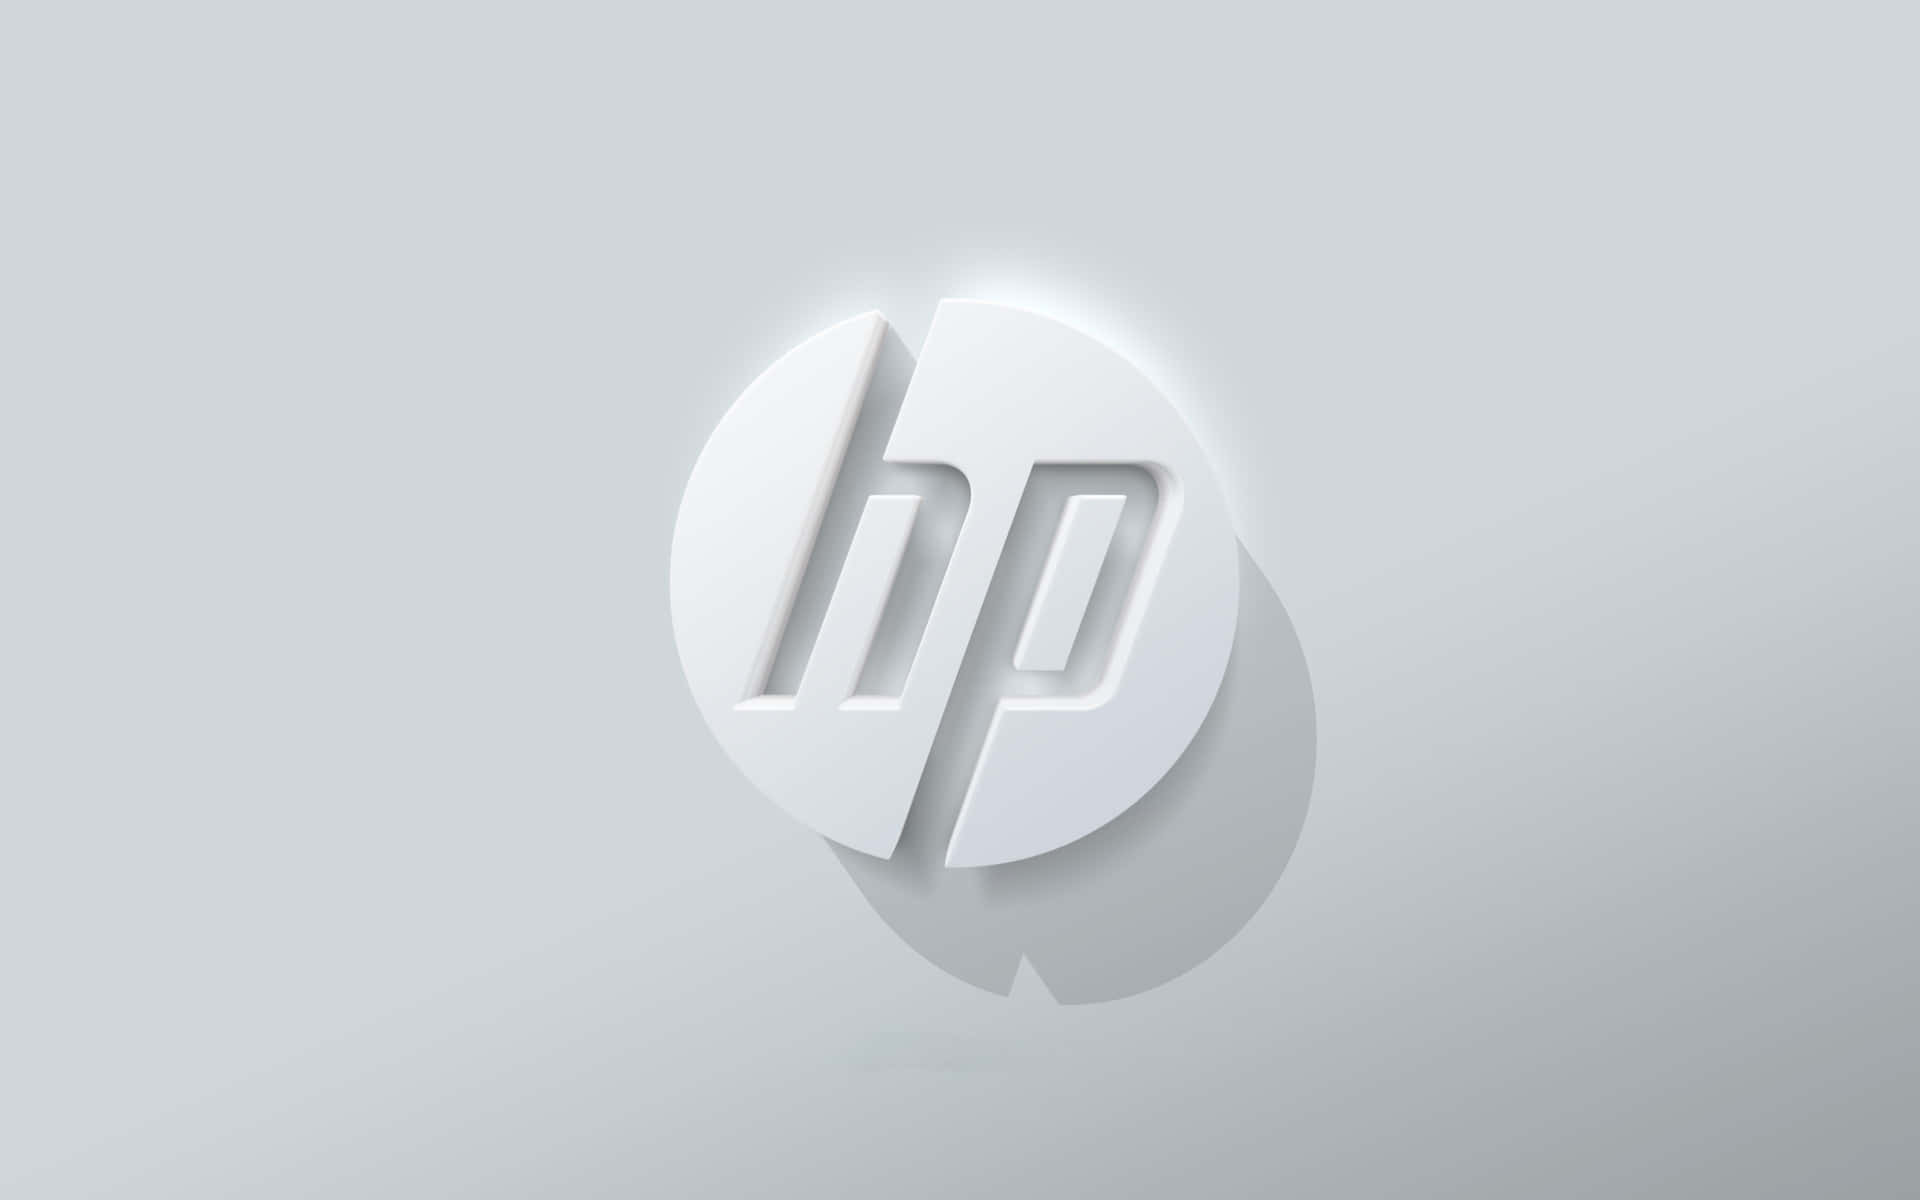 HP - Technology for the Future